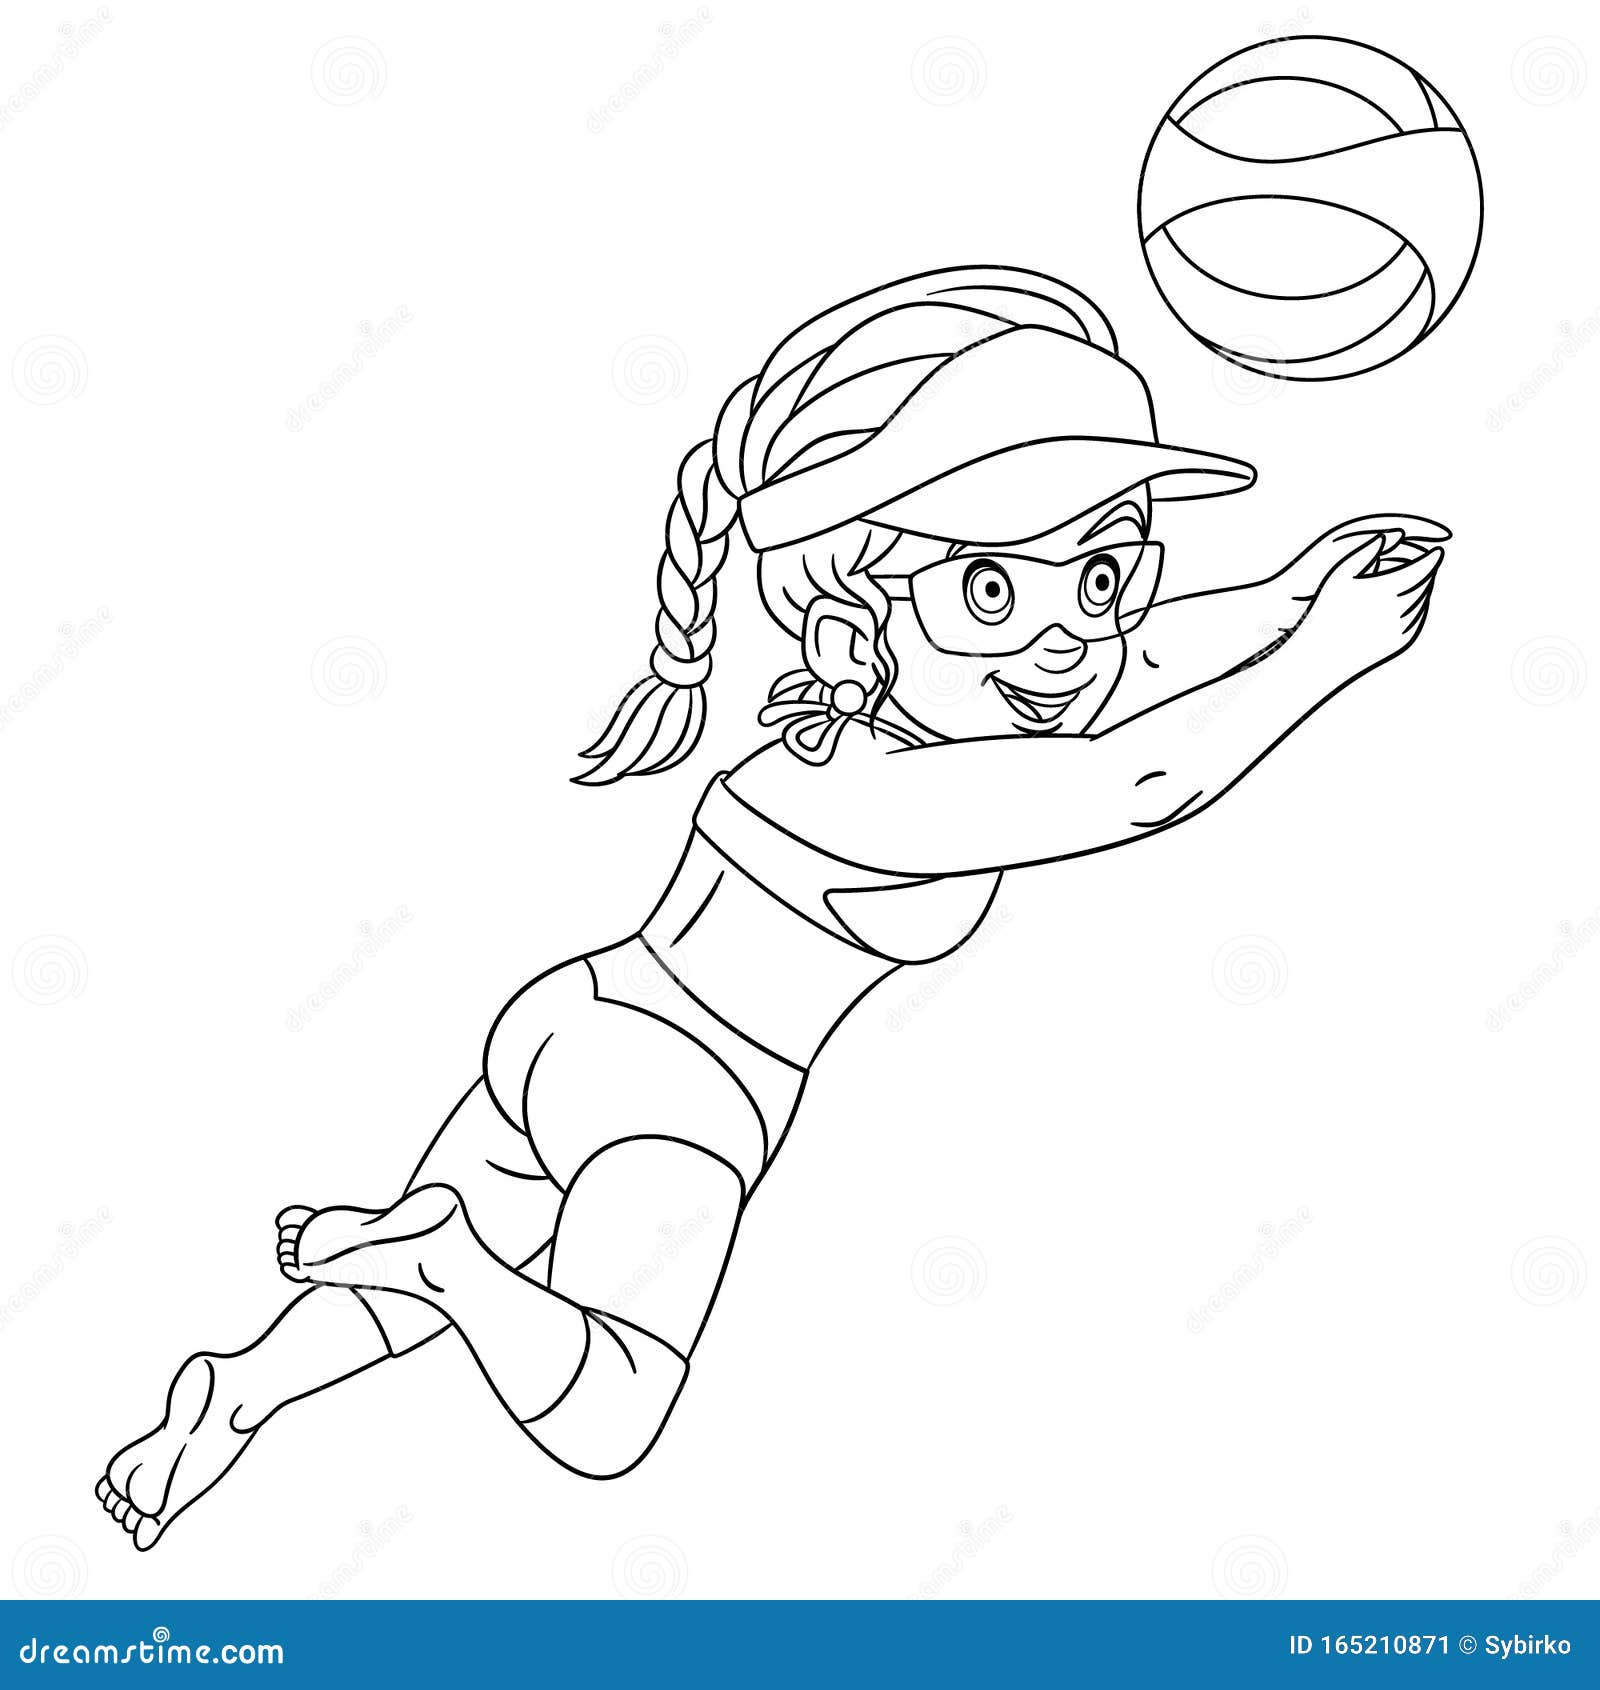 Kids playing volleyball stock illustrations â kids playing volleyball stock illustrations vectors clipart